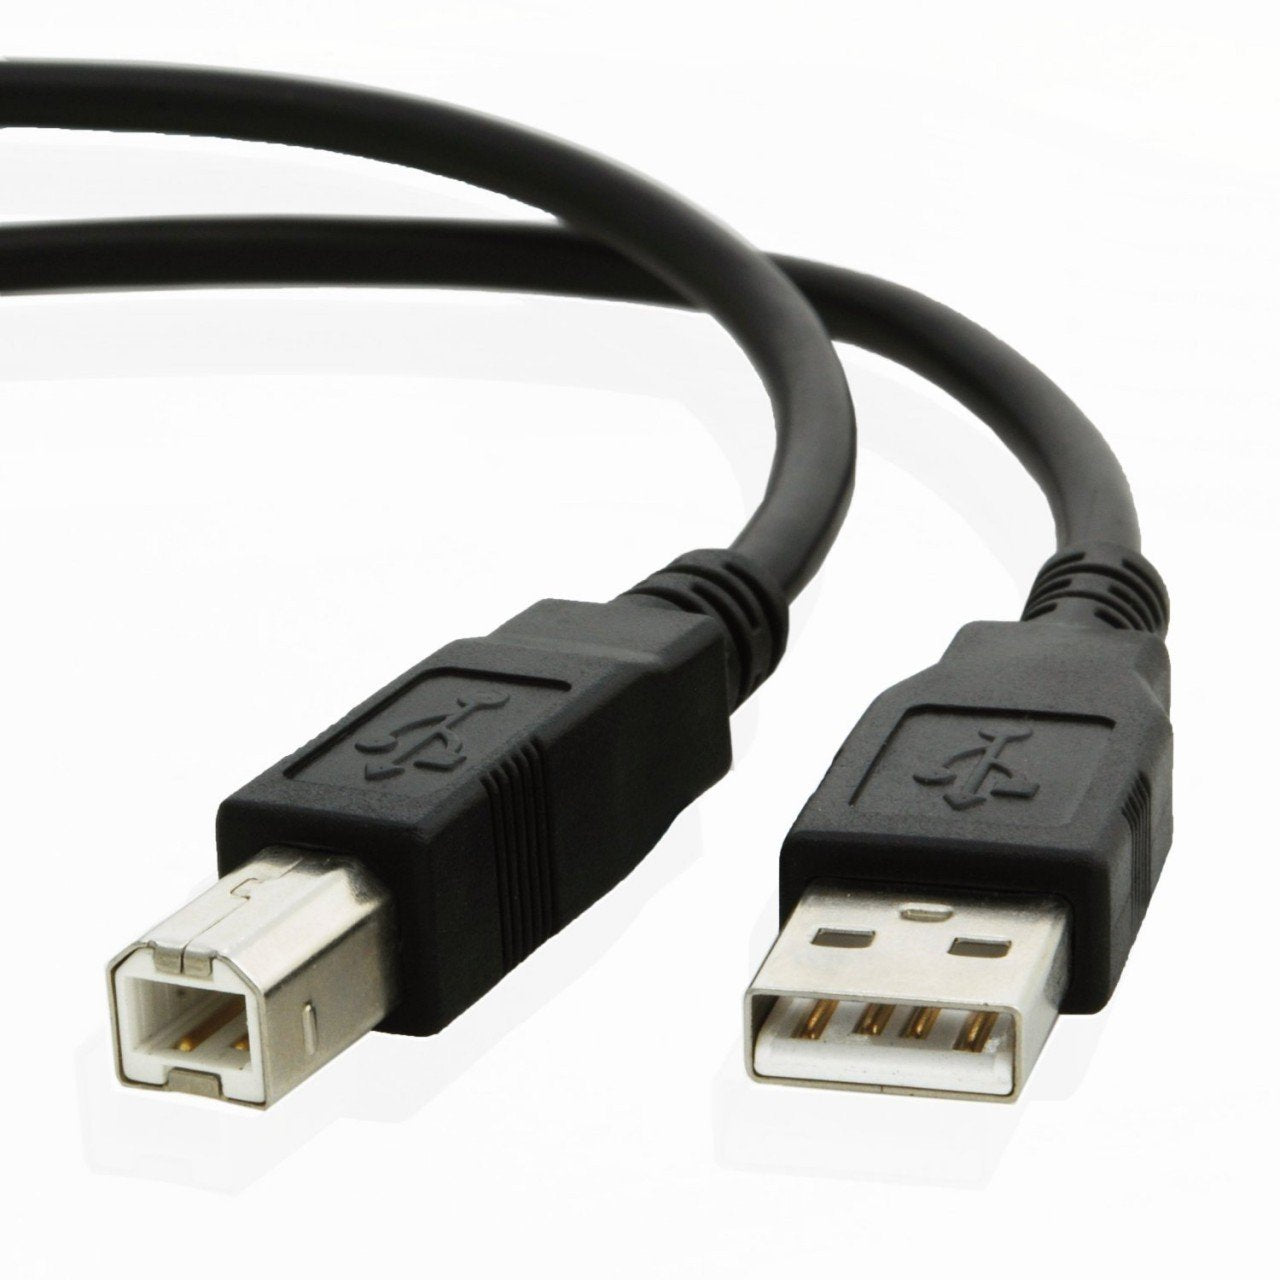 USB cable for Hp OFFICEJET 7612